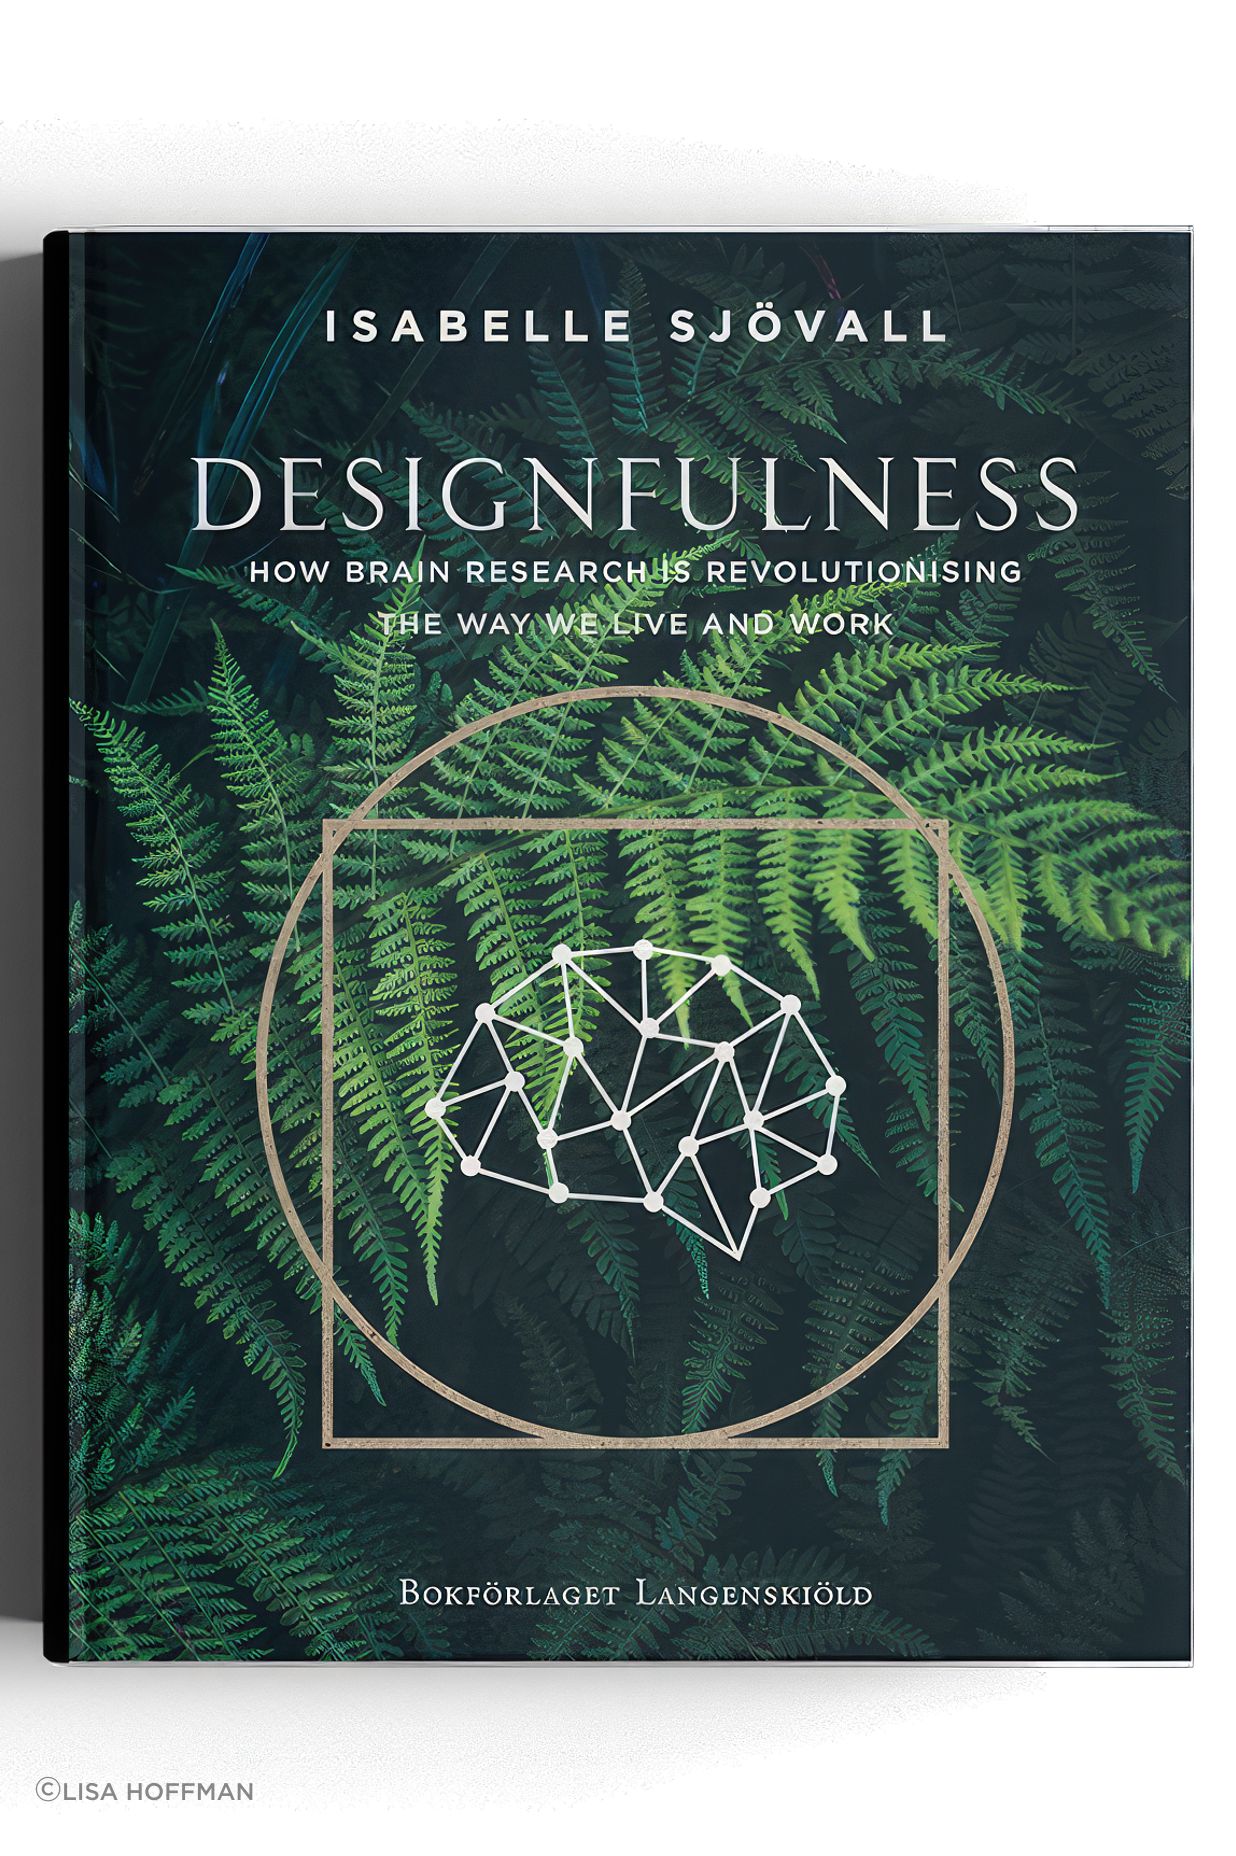 Isabelle is the author of Designfulness (2020), which summarises scientific research and gives concrete tips on how we can create environments that strengthen community, enhance recovery, as well as increase focus and creativity.